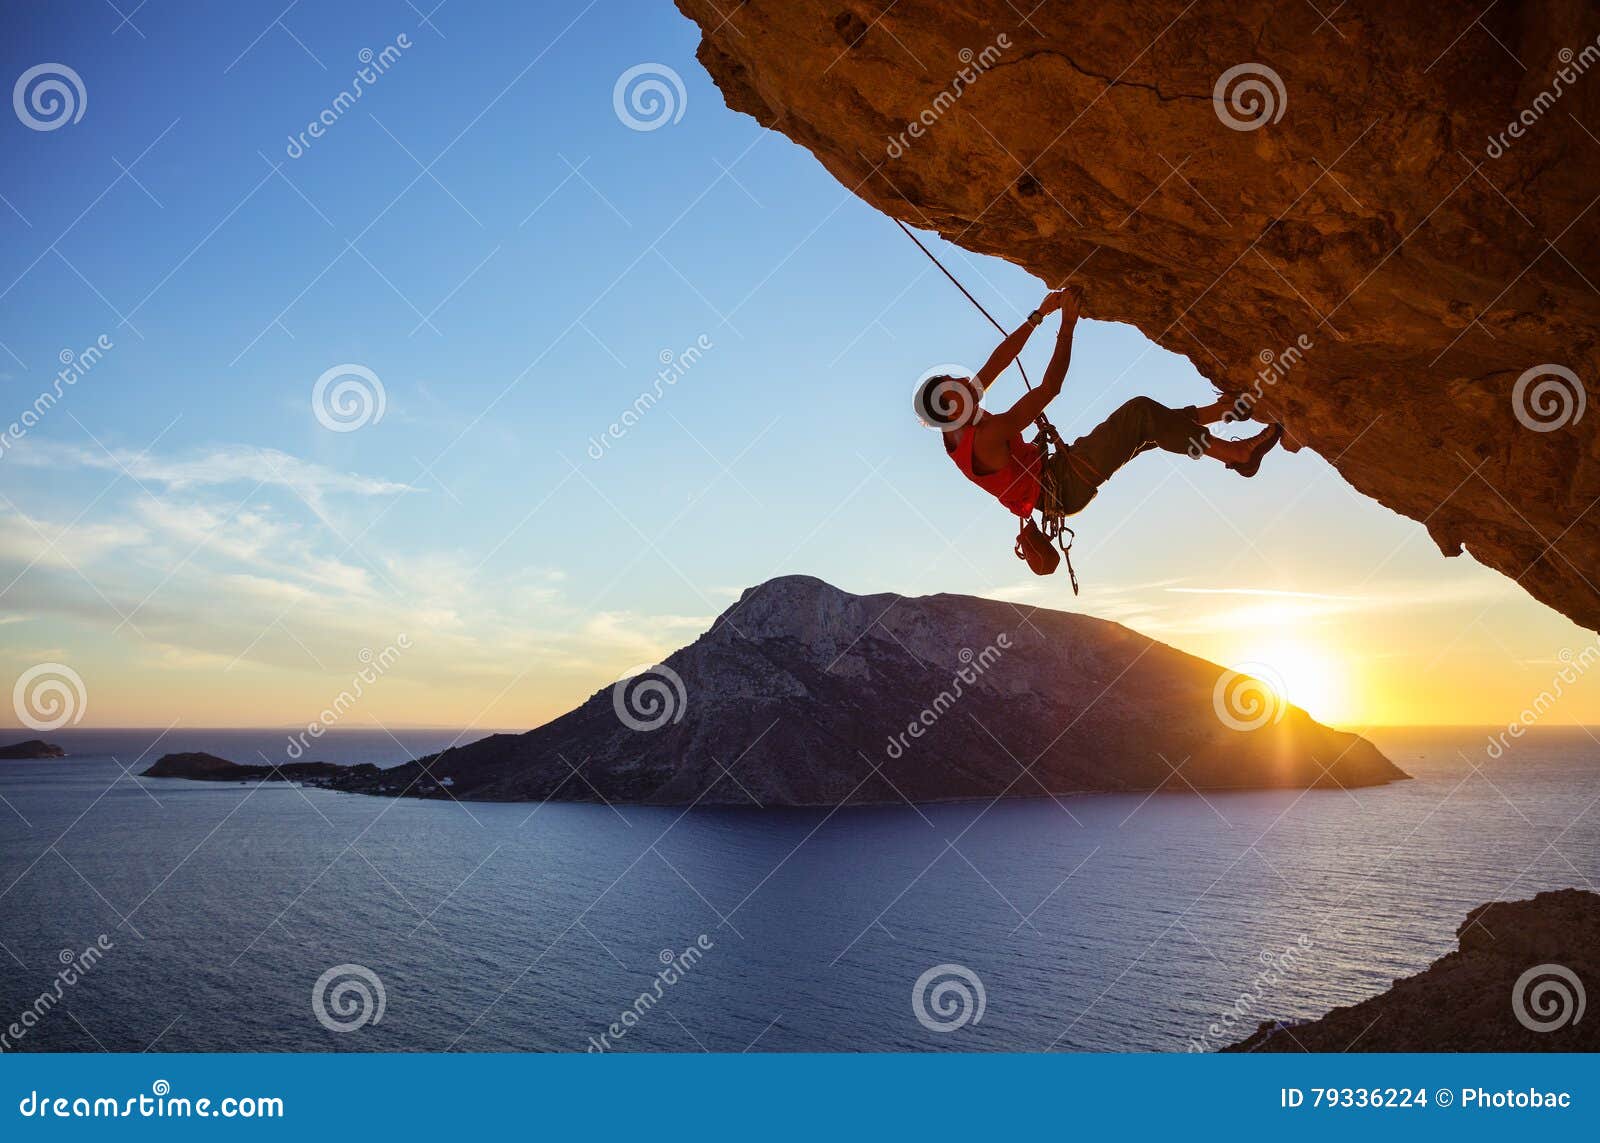 male climber on overhanging rock